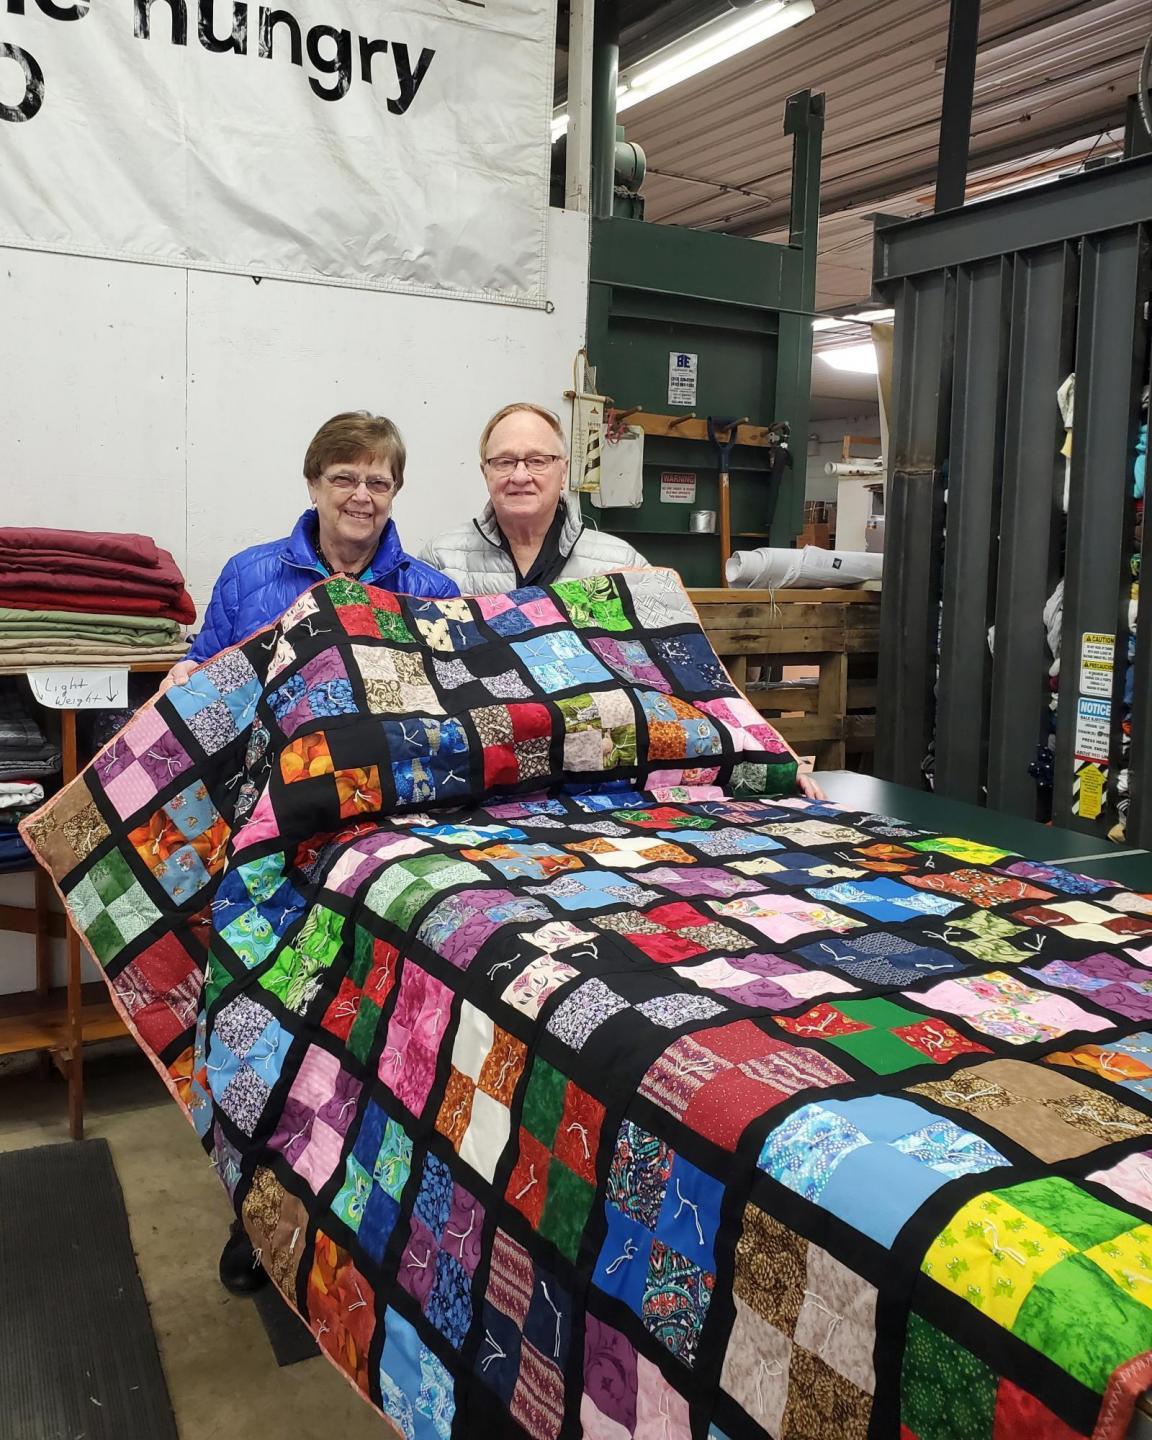 Two people display a colorful comforter on a table in front of them in a warehouse.